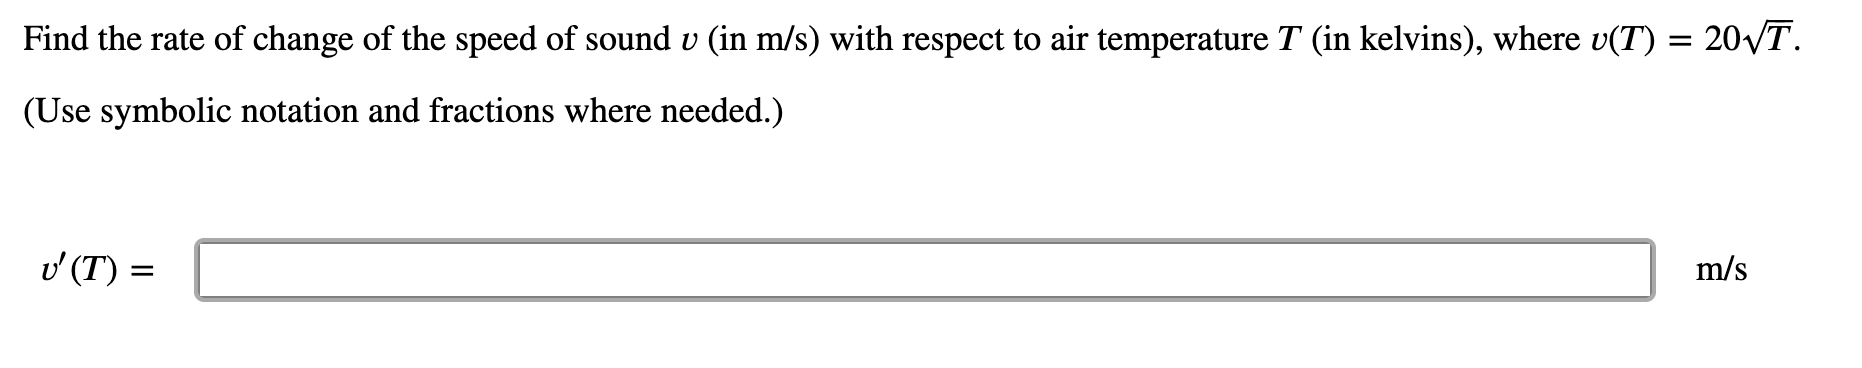 Find the rate of change of the speed of sound v (in m/s) with respect to air temperature T (in kelvins), where v(T) = 20VT.
(Use symbolic notation and fractions where needed.)
v (T) =
m/s
